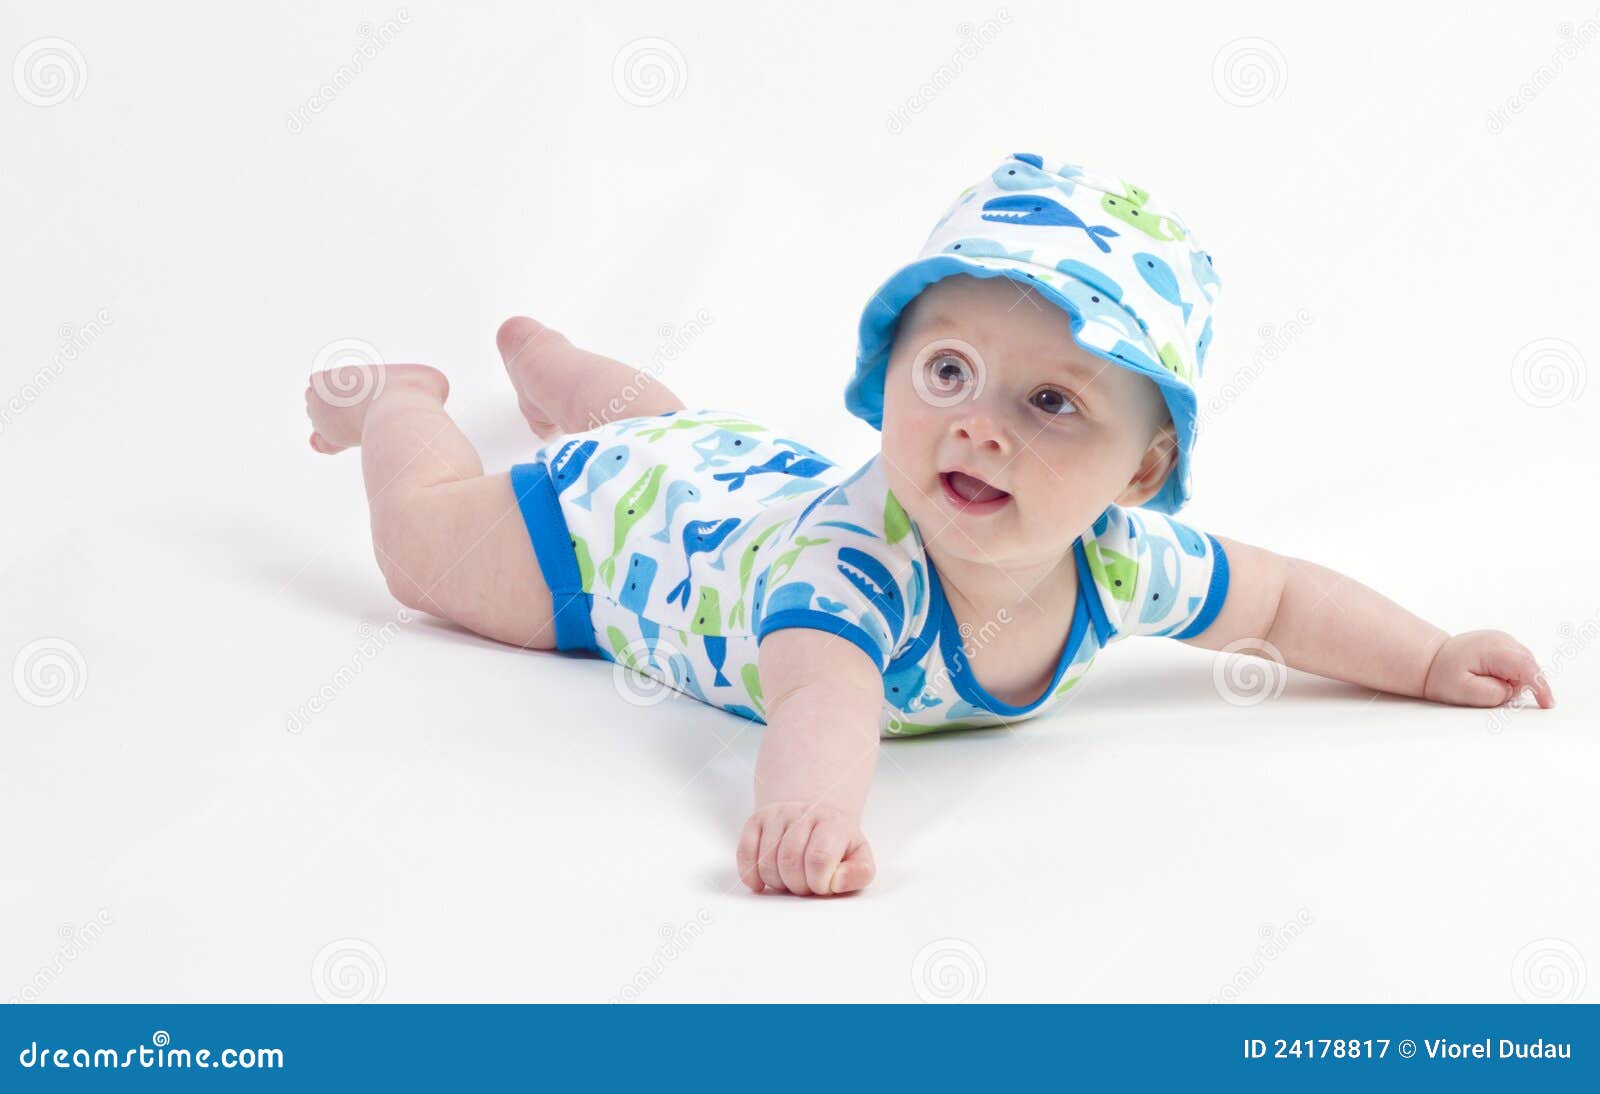 Cute little baby boy stock image. Image of background - 24178817